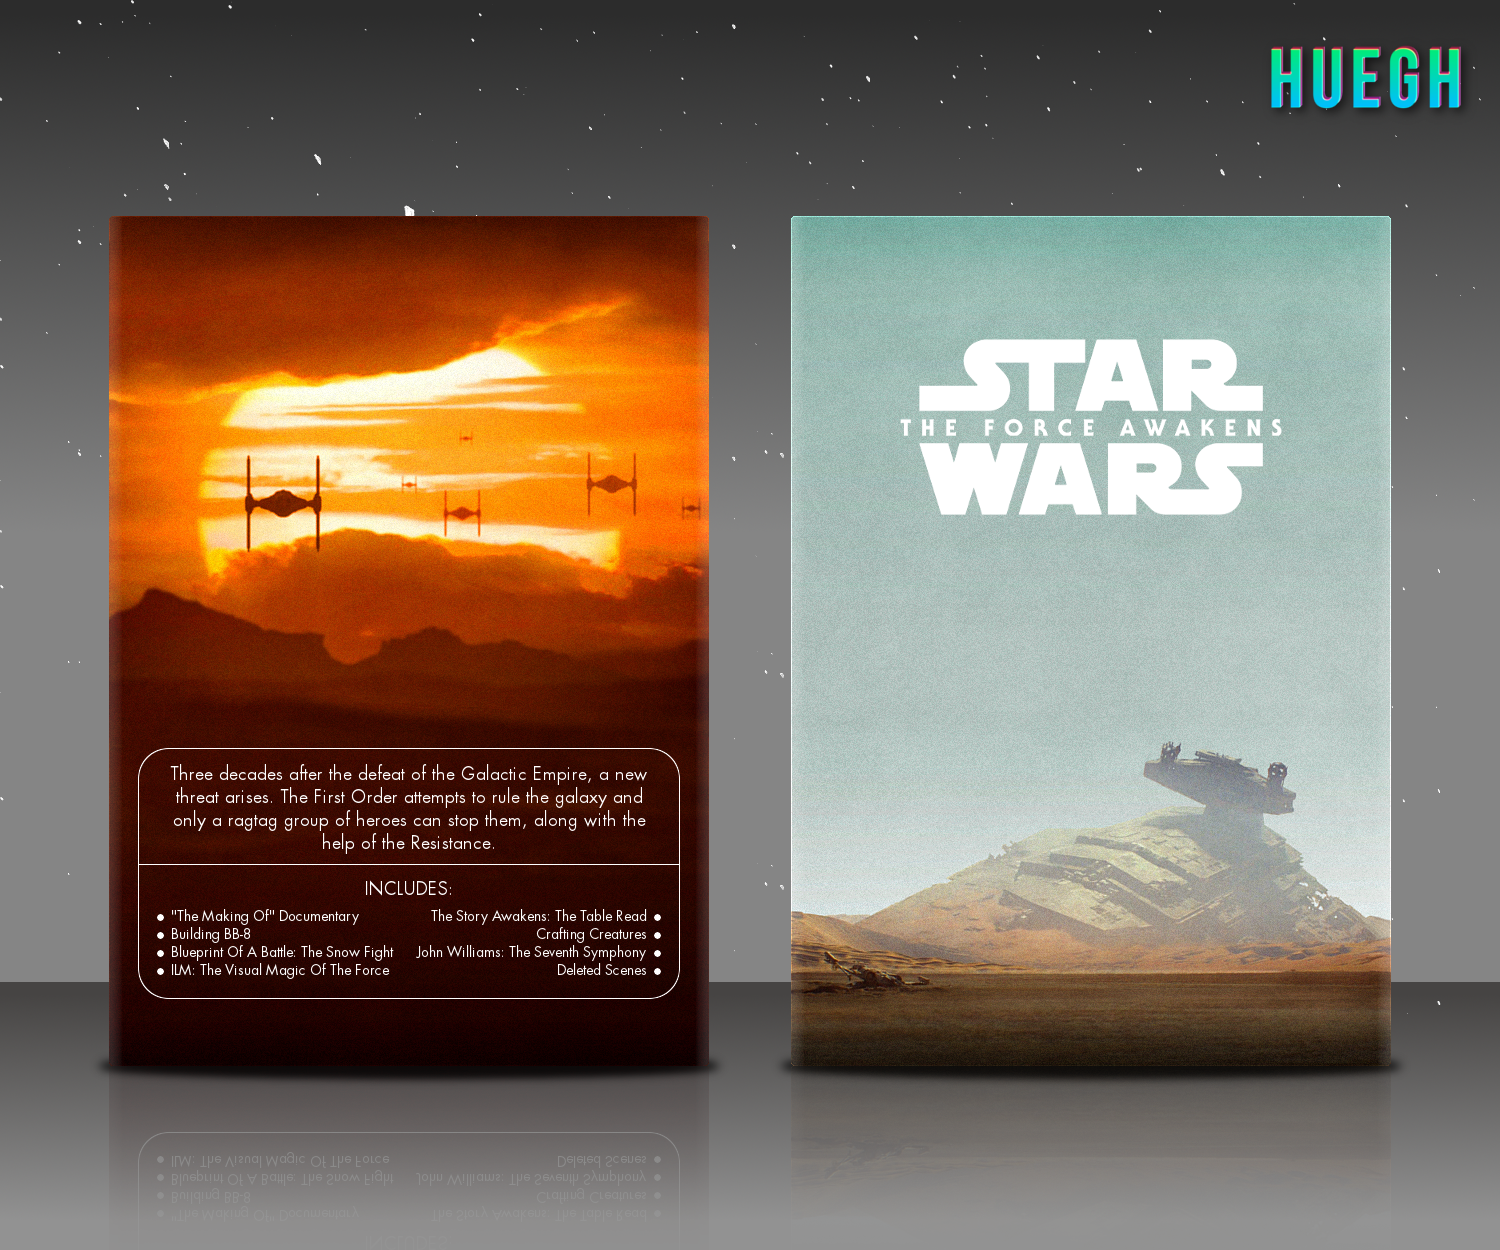 Star Wars: The Force Awakens box cover